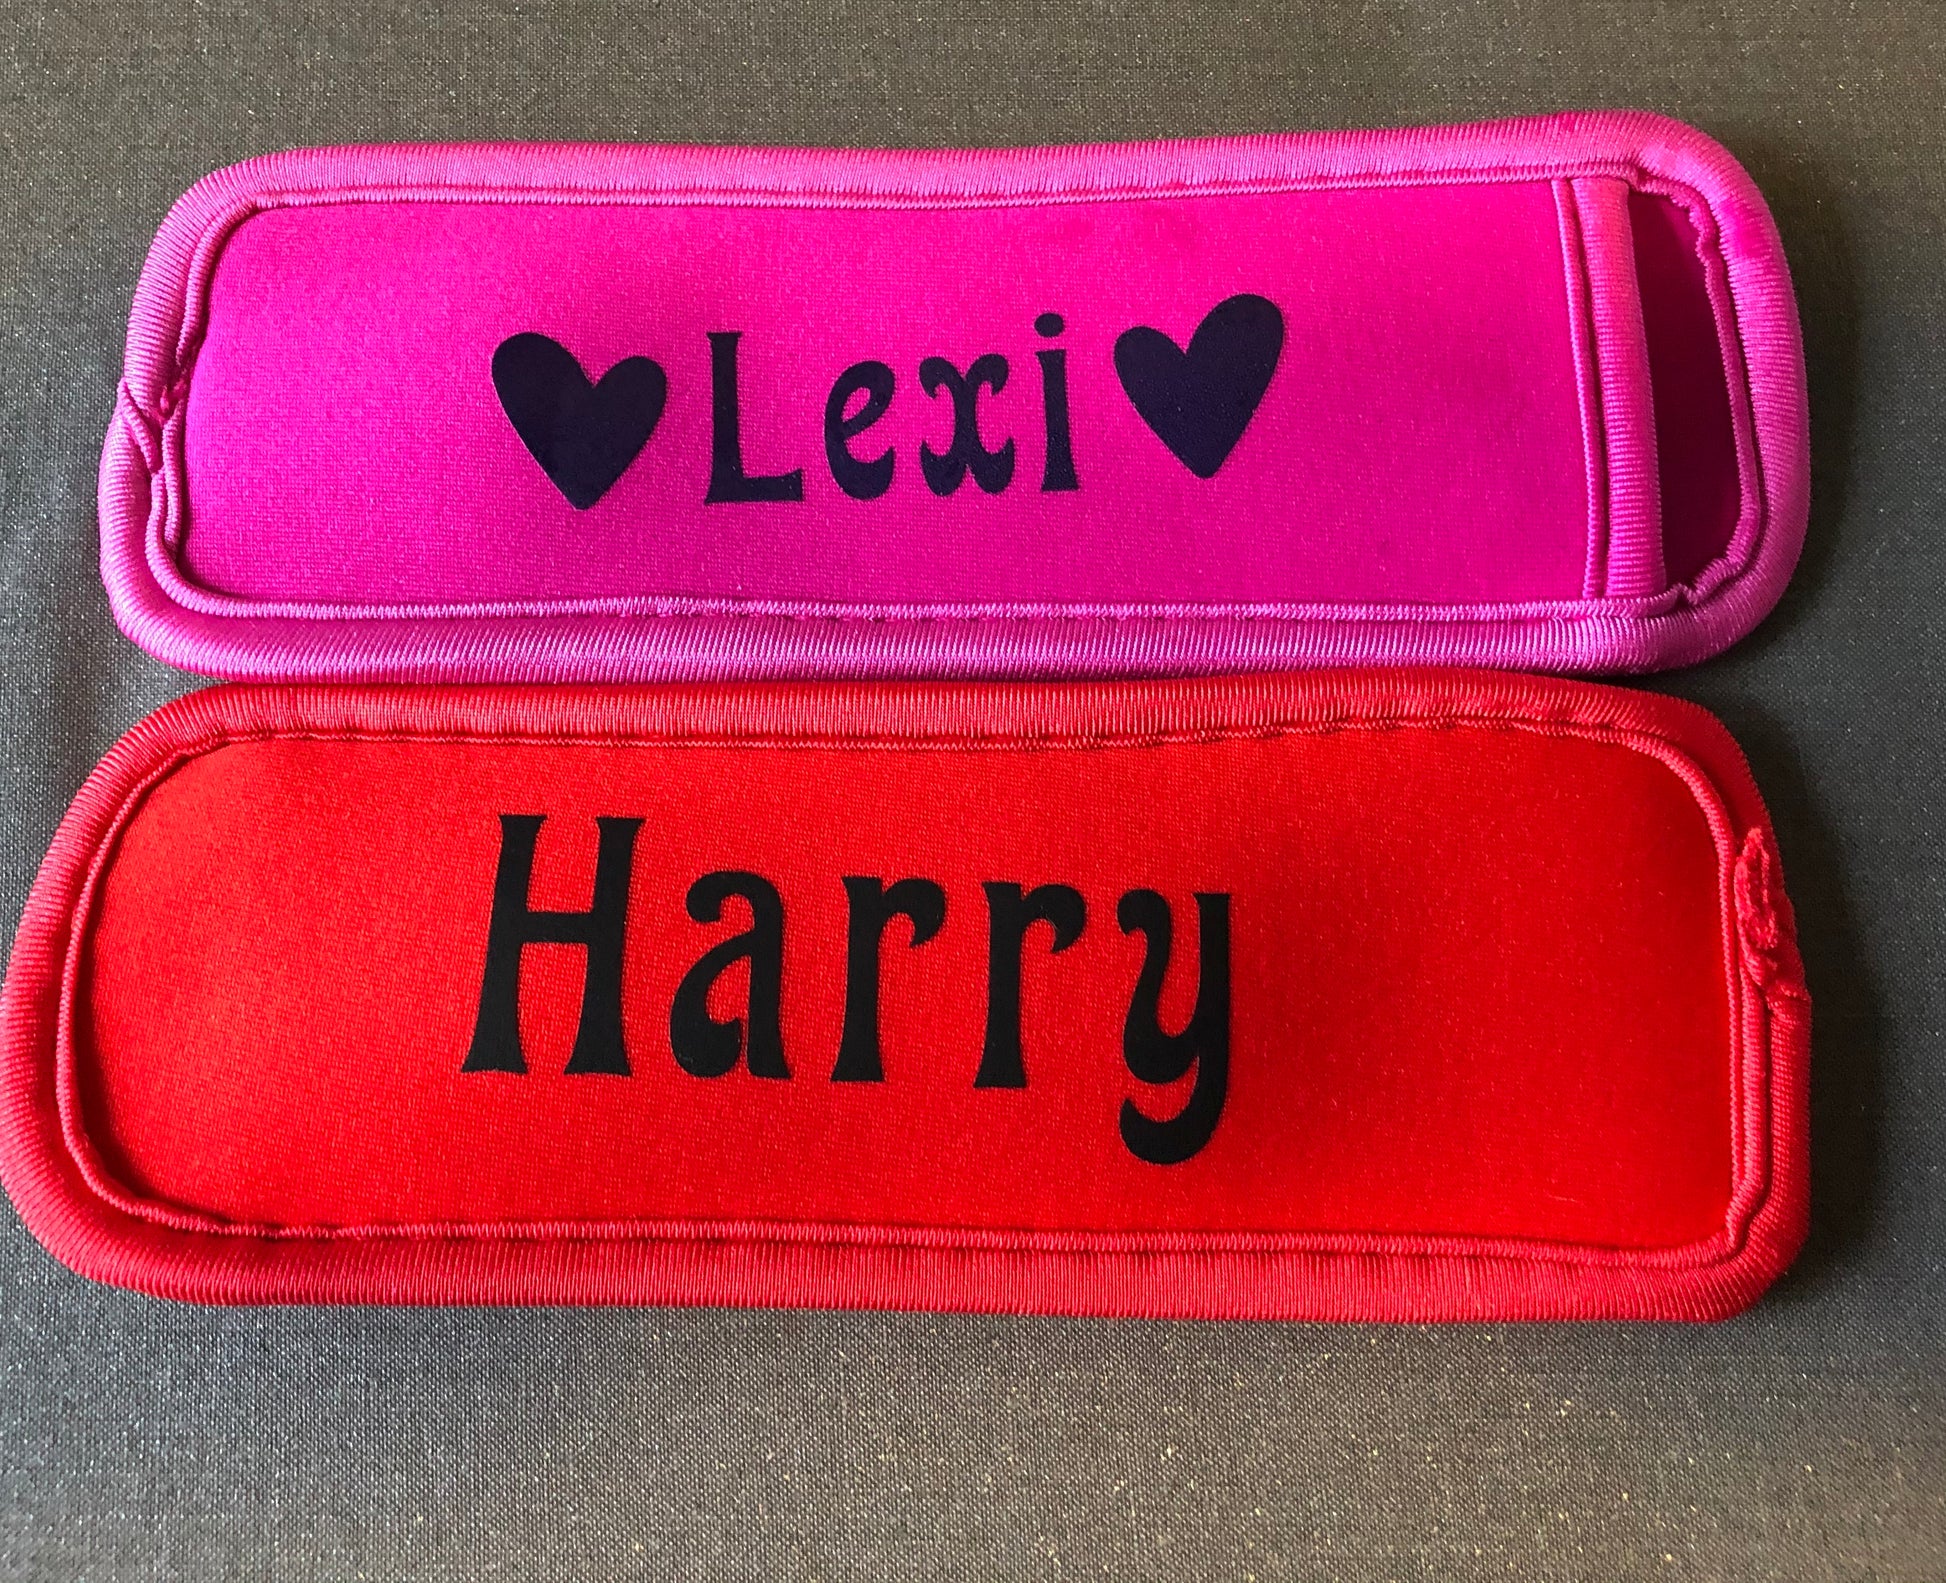 Ice pop/ice lolly holders - personalised! - Lilybet loves